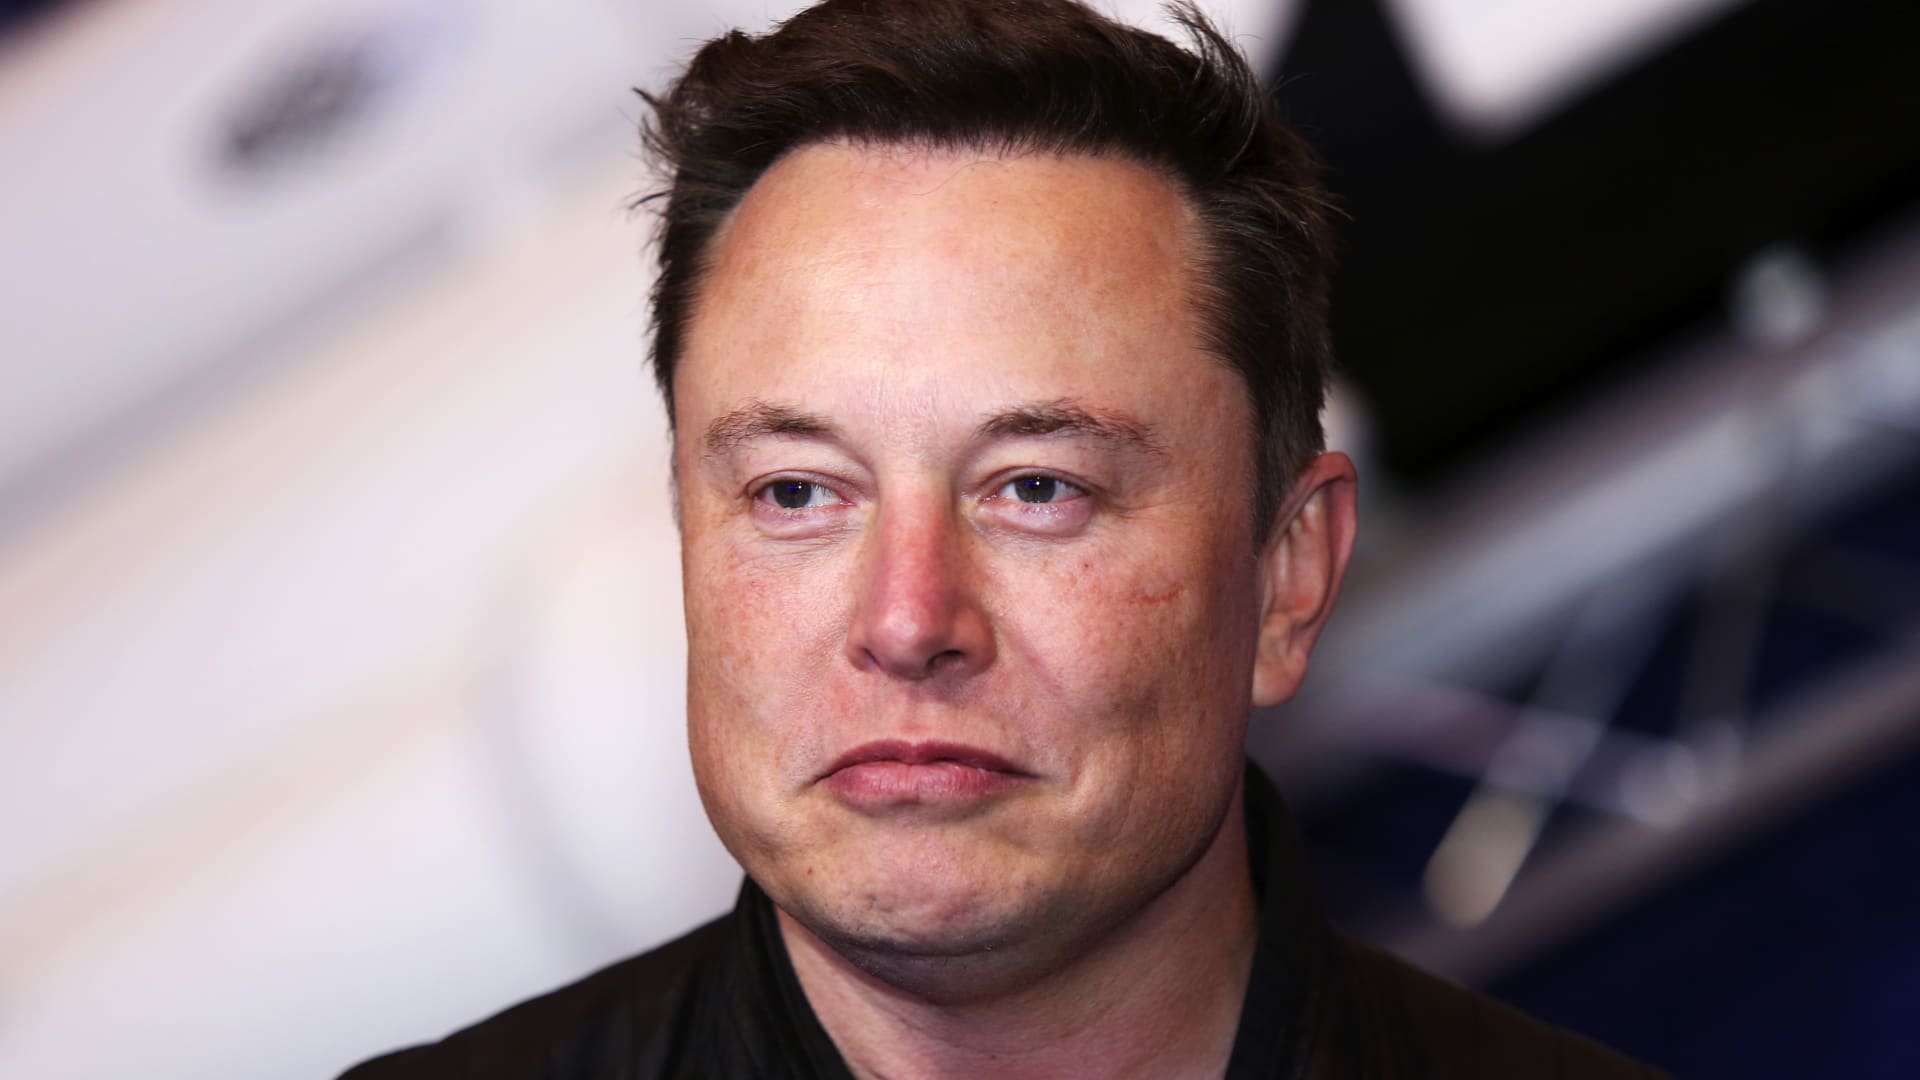 California police say member of Elon Musk’s security team is a suspect following stalker claim